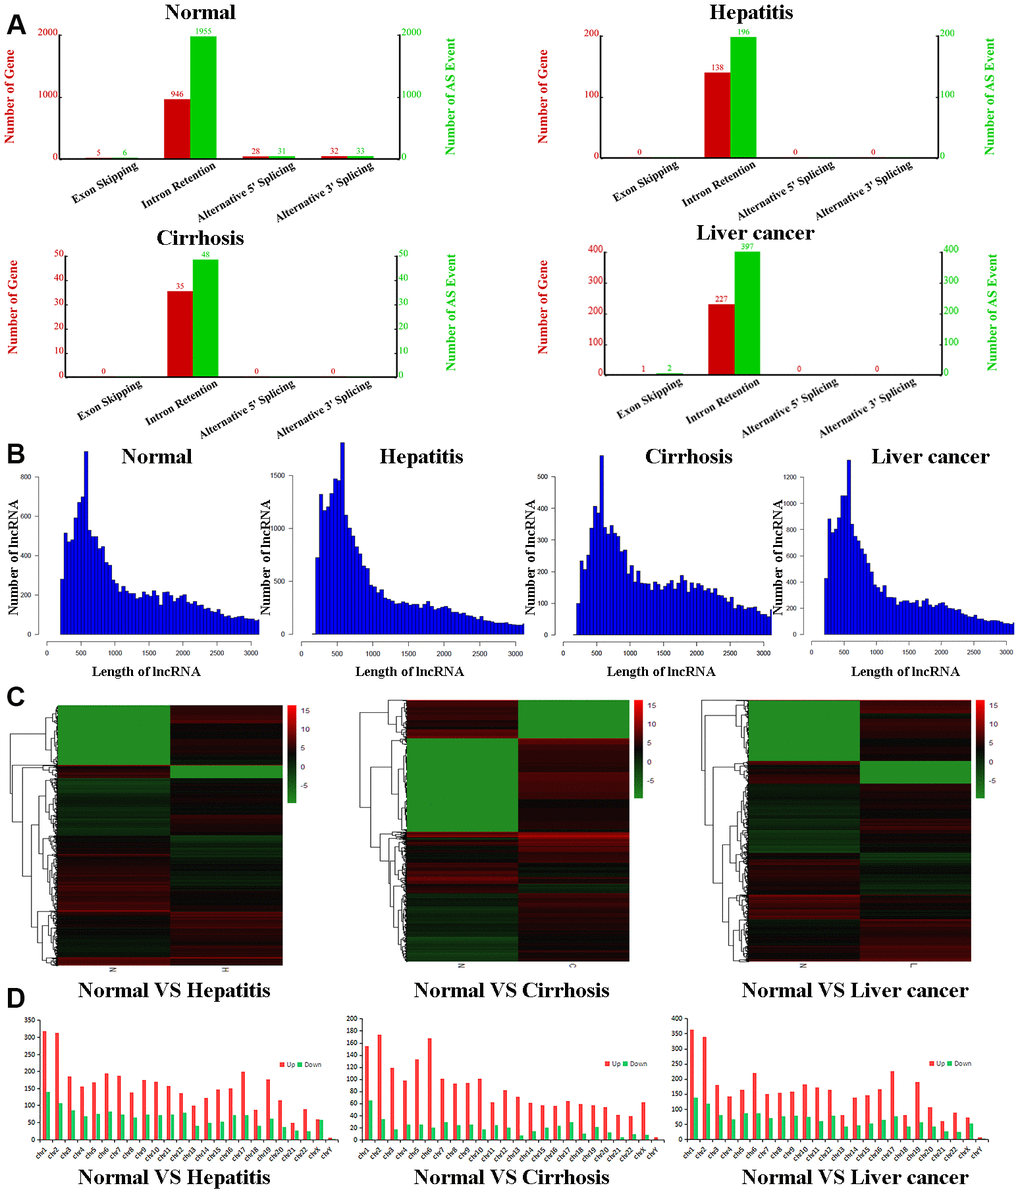 Bioinformatic analyses of lncRNAs. (A) Number of genes (red) and alternate splicing events (green) for lncRNAs from control, hepatitis, cirrhosis, and HCC groups. (B) Length distribution of lncRNAs in control, hepatitis, cirrhosis, and HCC groups. (C) Cluster heatmaps of lncRNA expression profiles in the control group compared to hepatitis, cirrhosis, and HCC groups. Gradient green represents downregulated lncRNAs, while gradient red represents upregulated lncRNAs. (D) Chromosomal distributions of lncRNAs in the control group compared to hepatitis, cirrhosis, and HCC groups. lncRNA, long noncoding RNA; HCC, hepatocellular carcinoma.